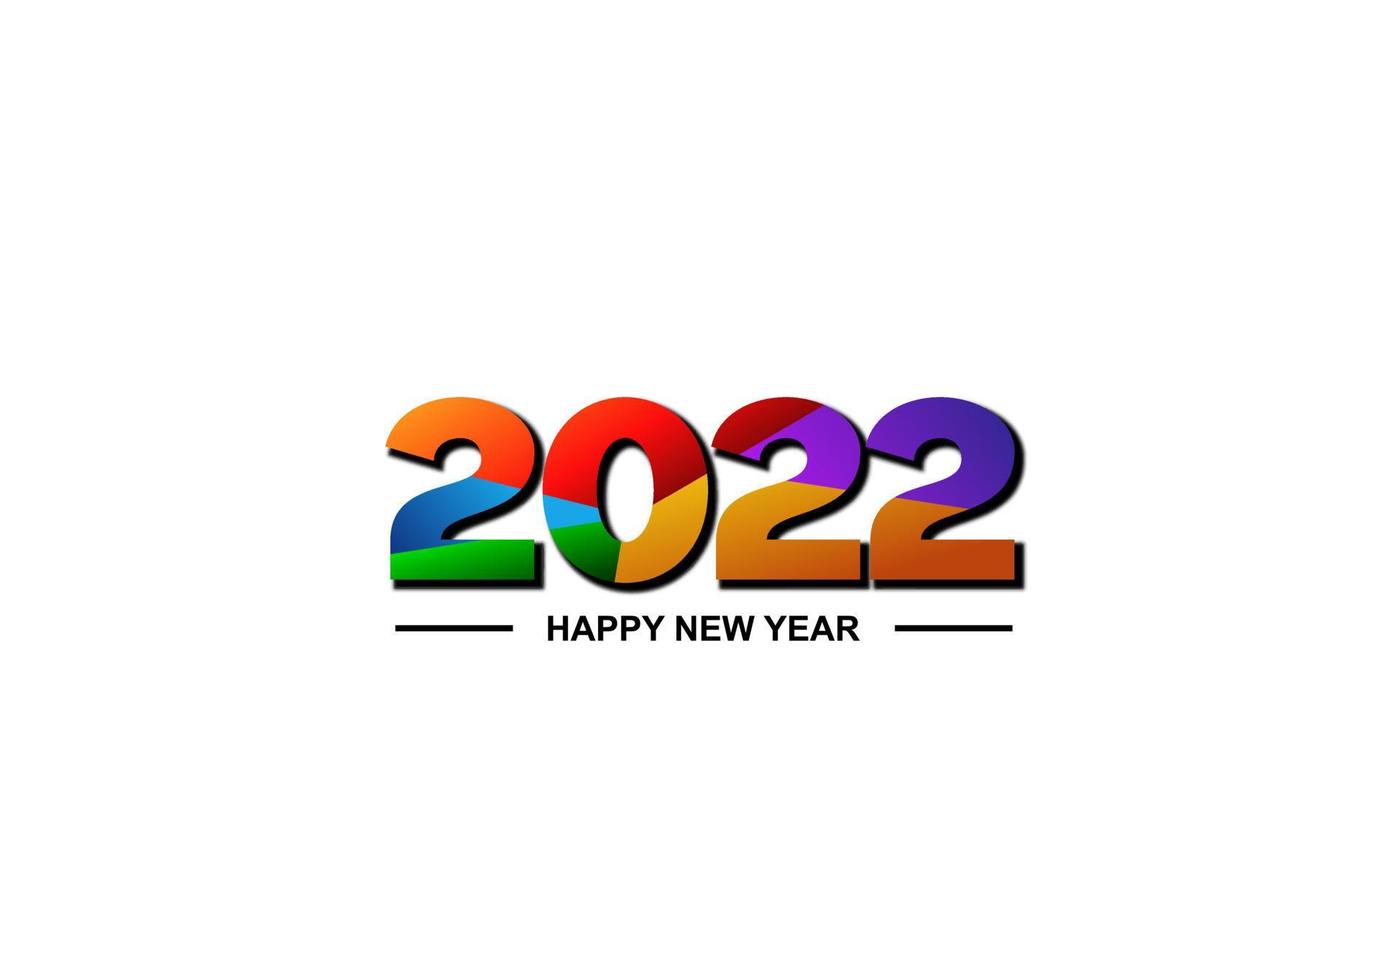 2022. 2022 Text. Happy New Year 2022. suitable for greeting, invitations, banner or background design of 2022, Vector design illustration